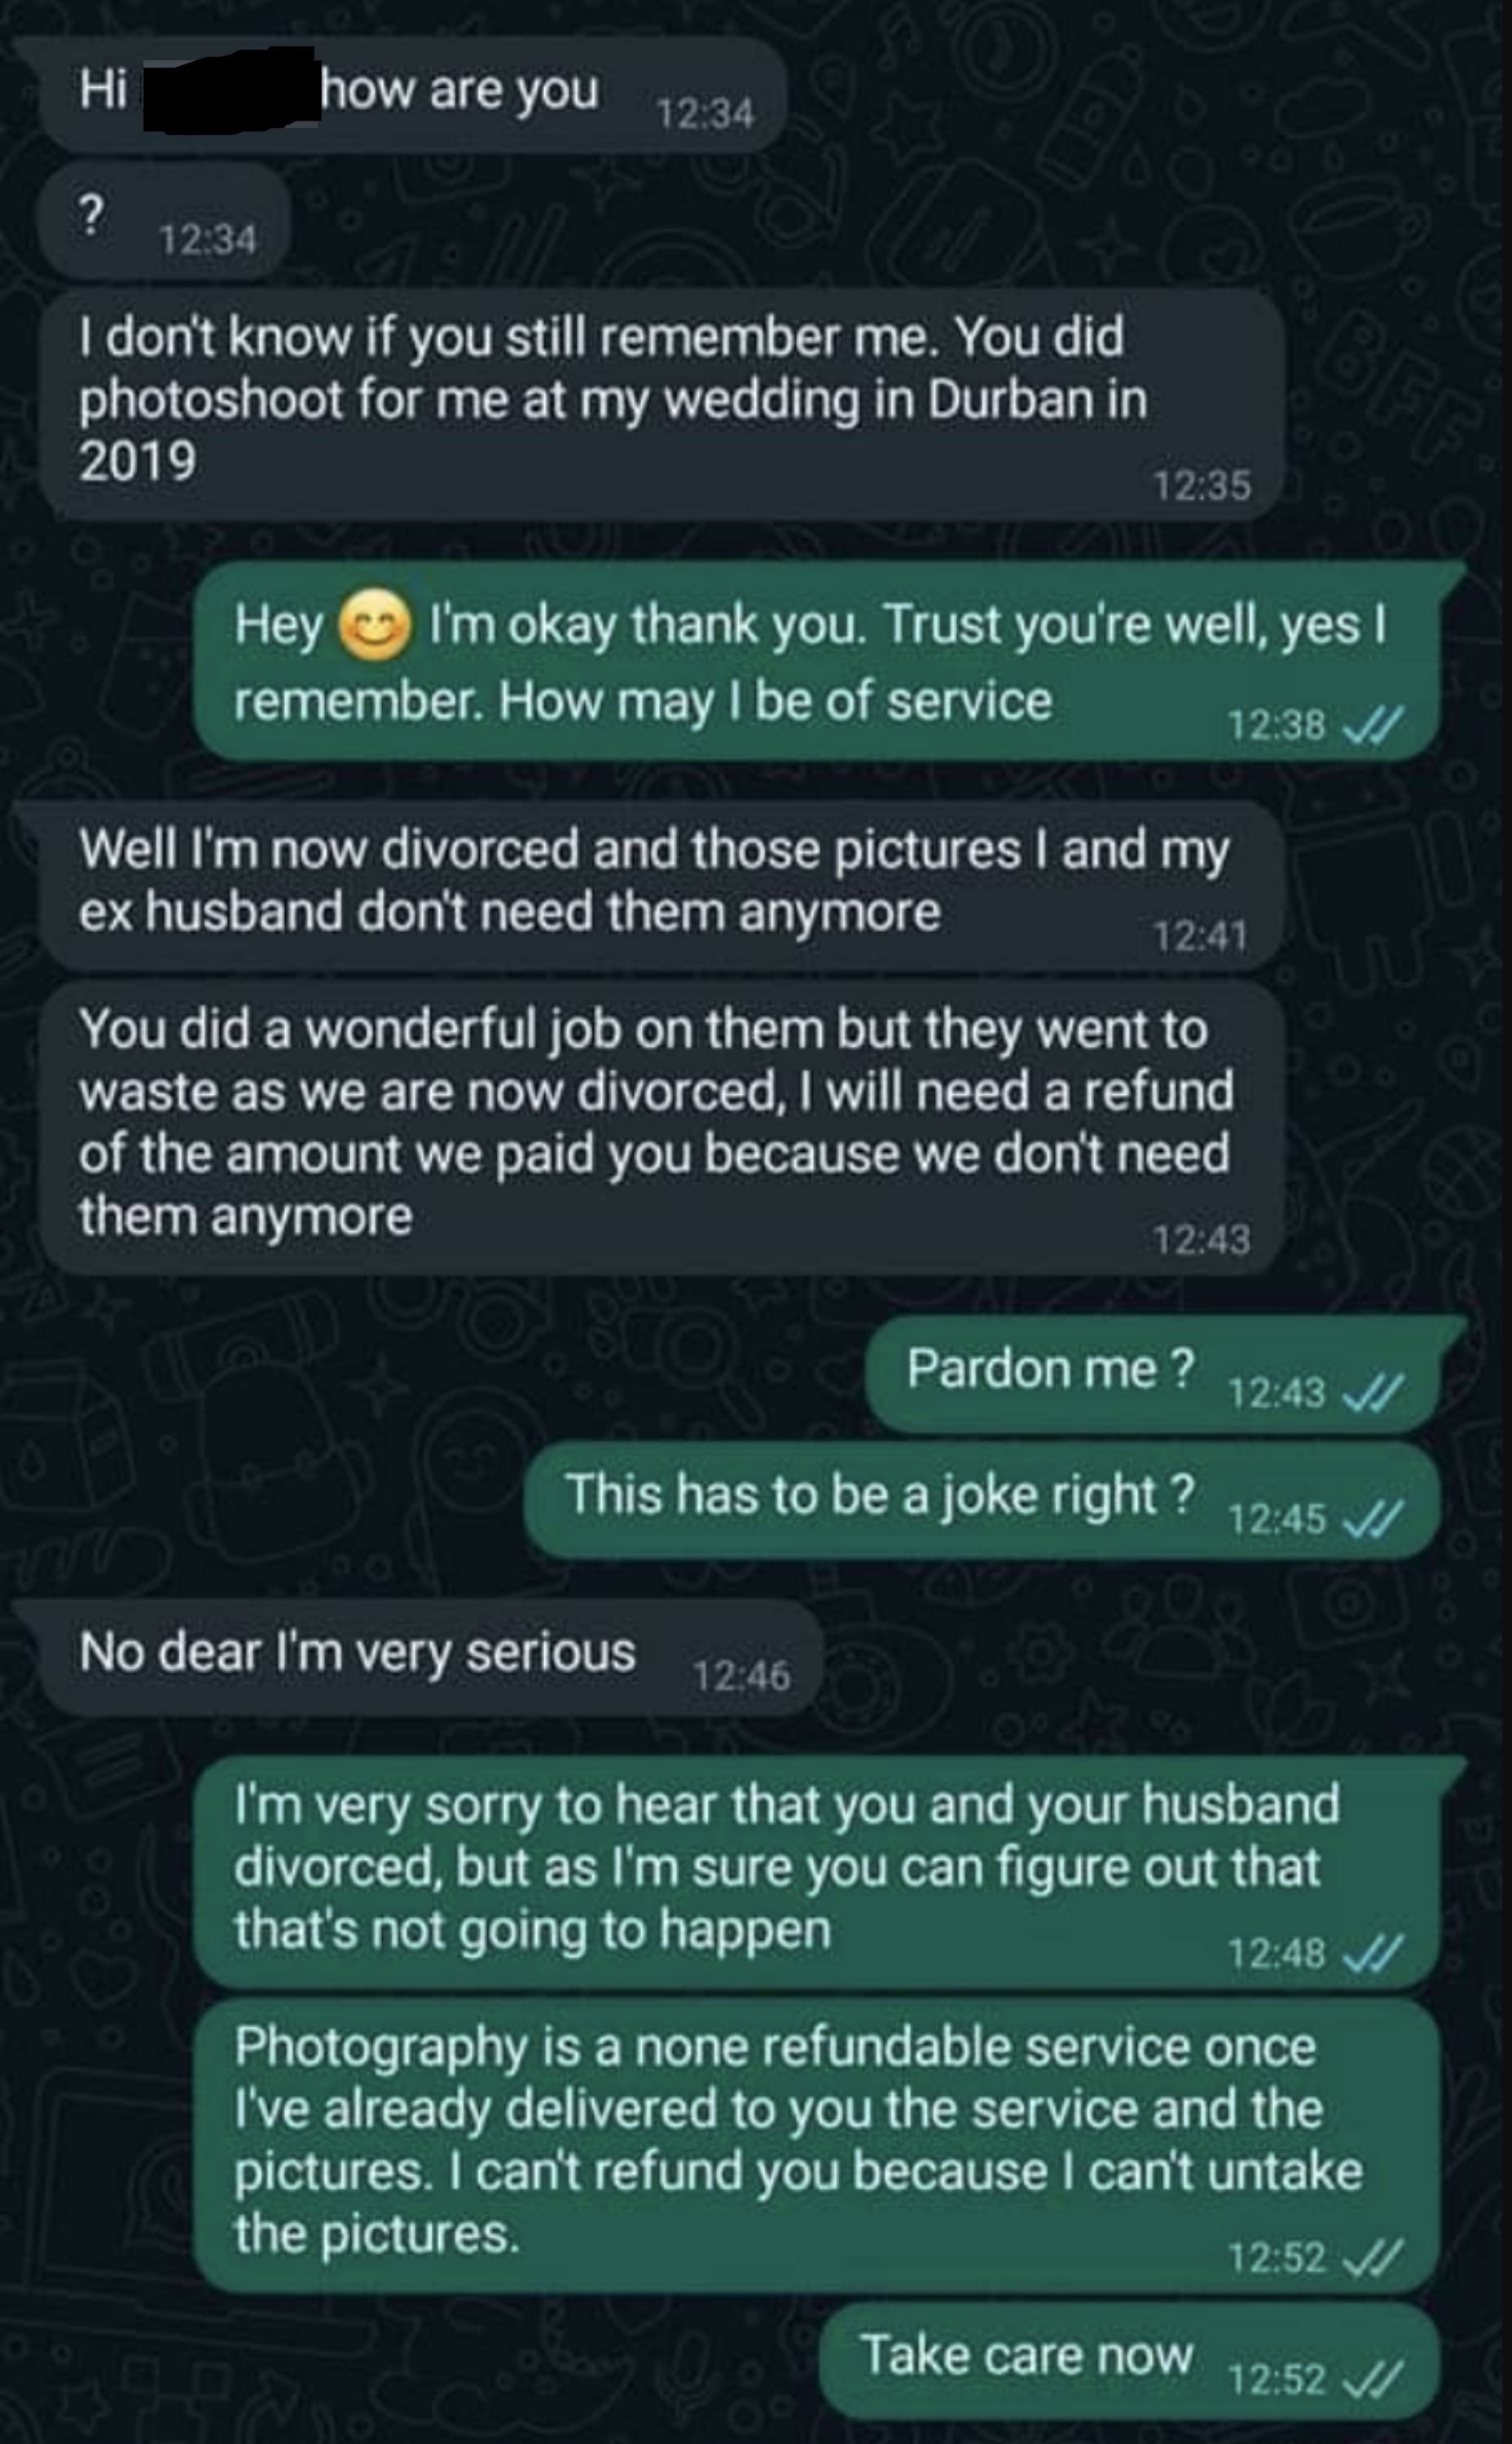 photographer saying that her job was done and she can&#x27;t do a refund after a divorce